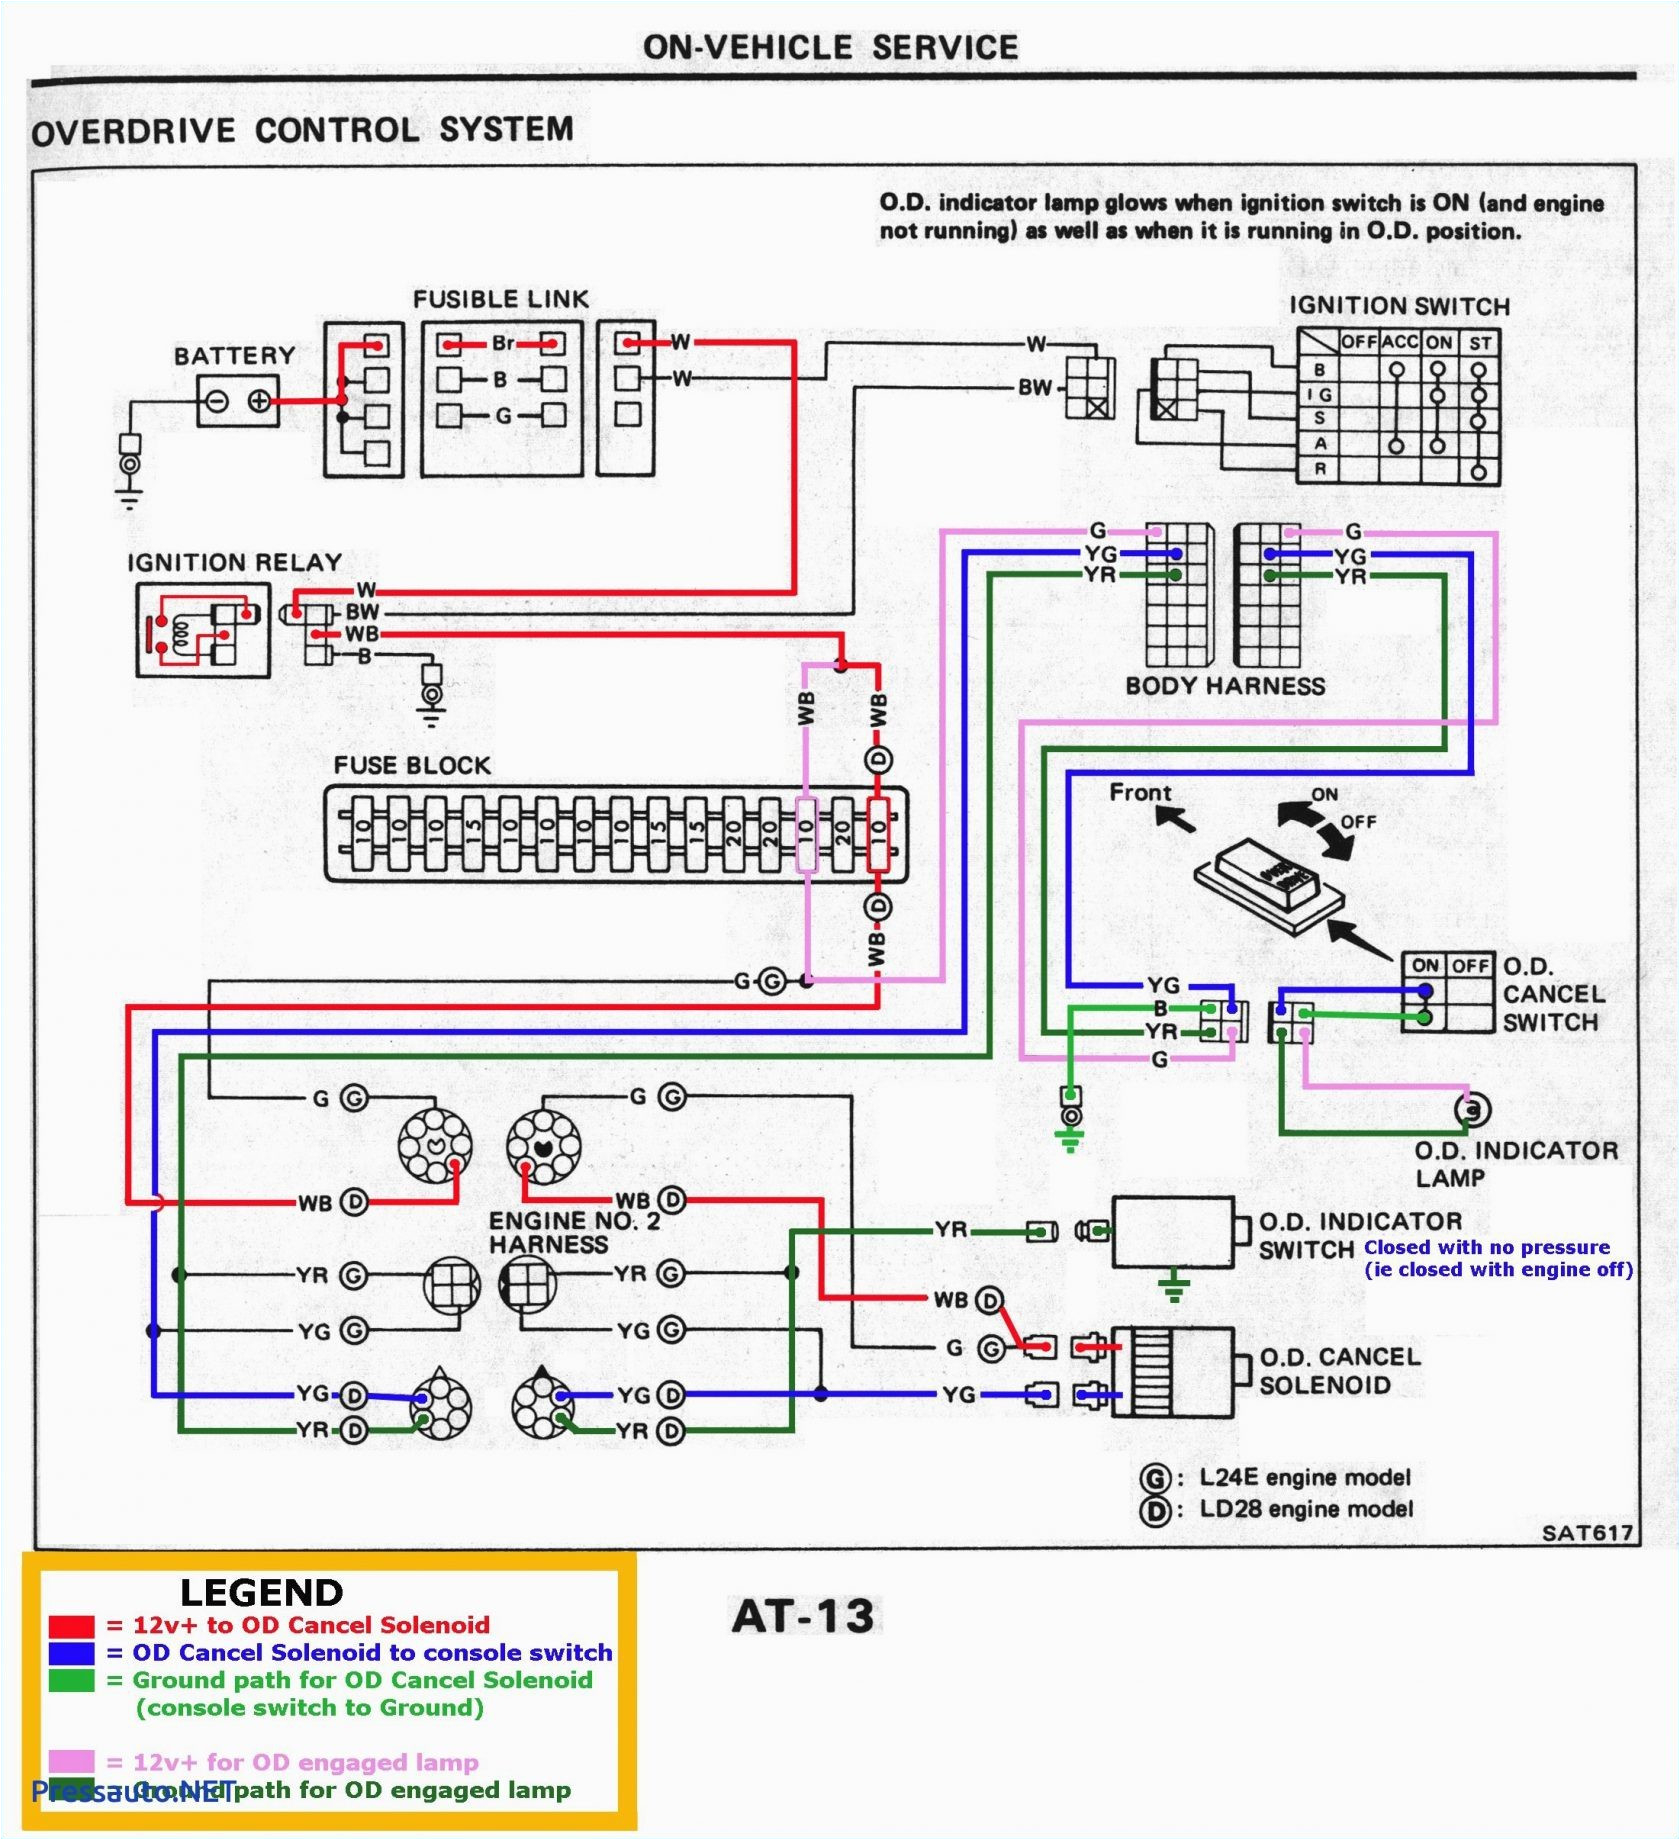 2006 Dodge Ram 2500 Radio Wiring Diagram How Many Wiring Harnesses are On A 2006 Dodge Ram Sport Wiring